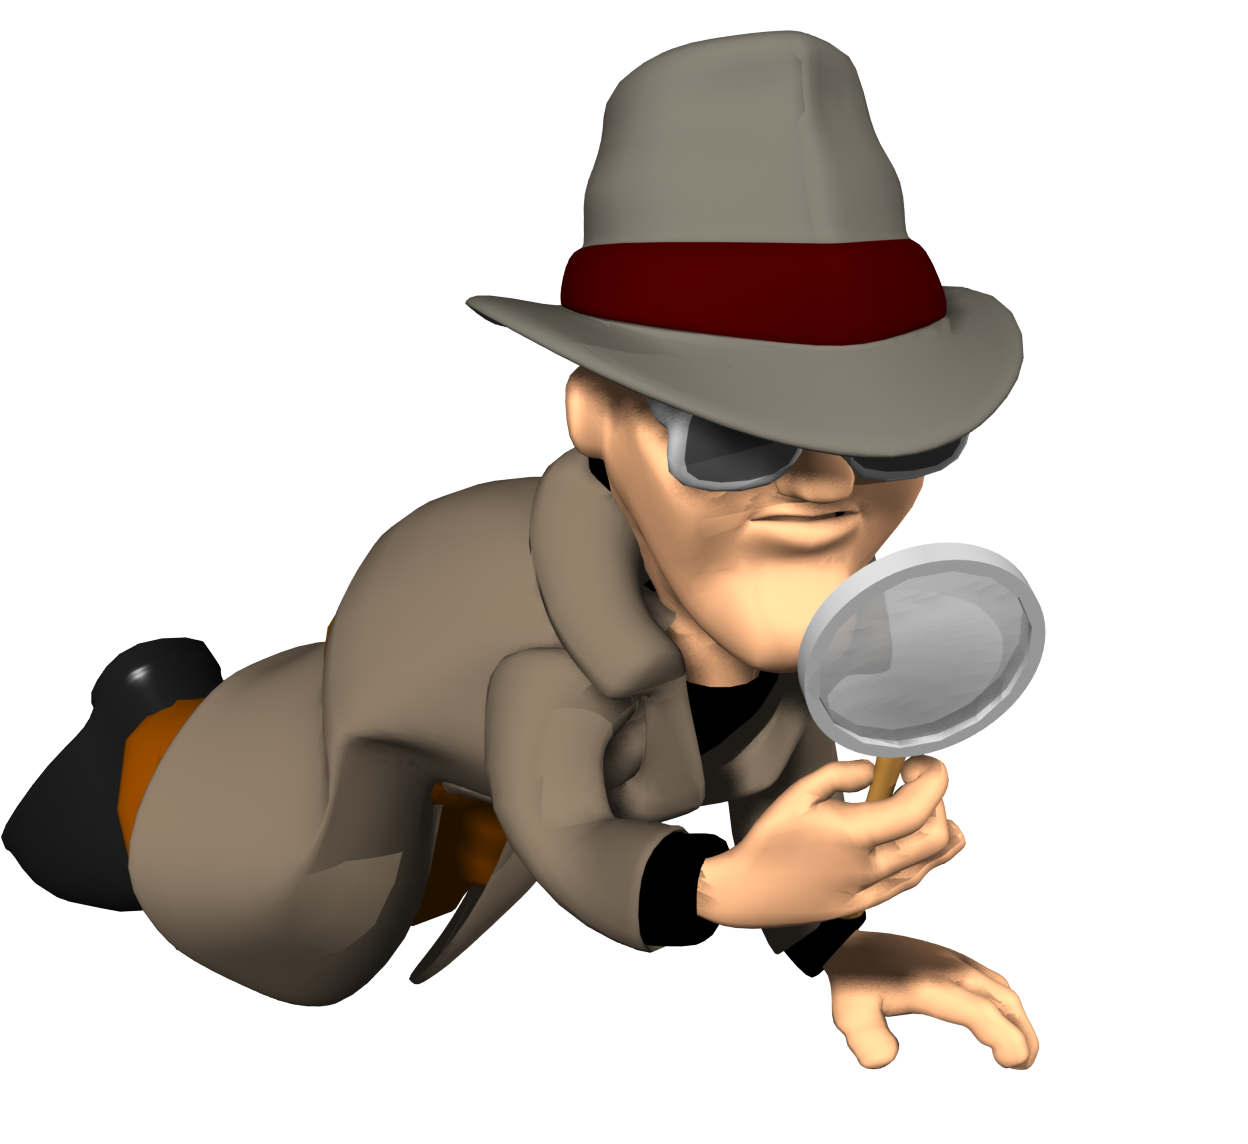 Get Matrimonial Investigations Done from Best Private Investigator, Investigator PNG HD - Free PNG